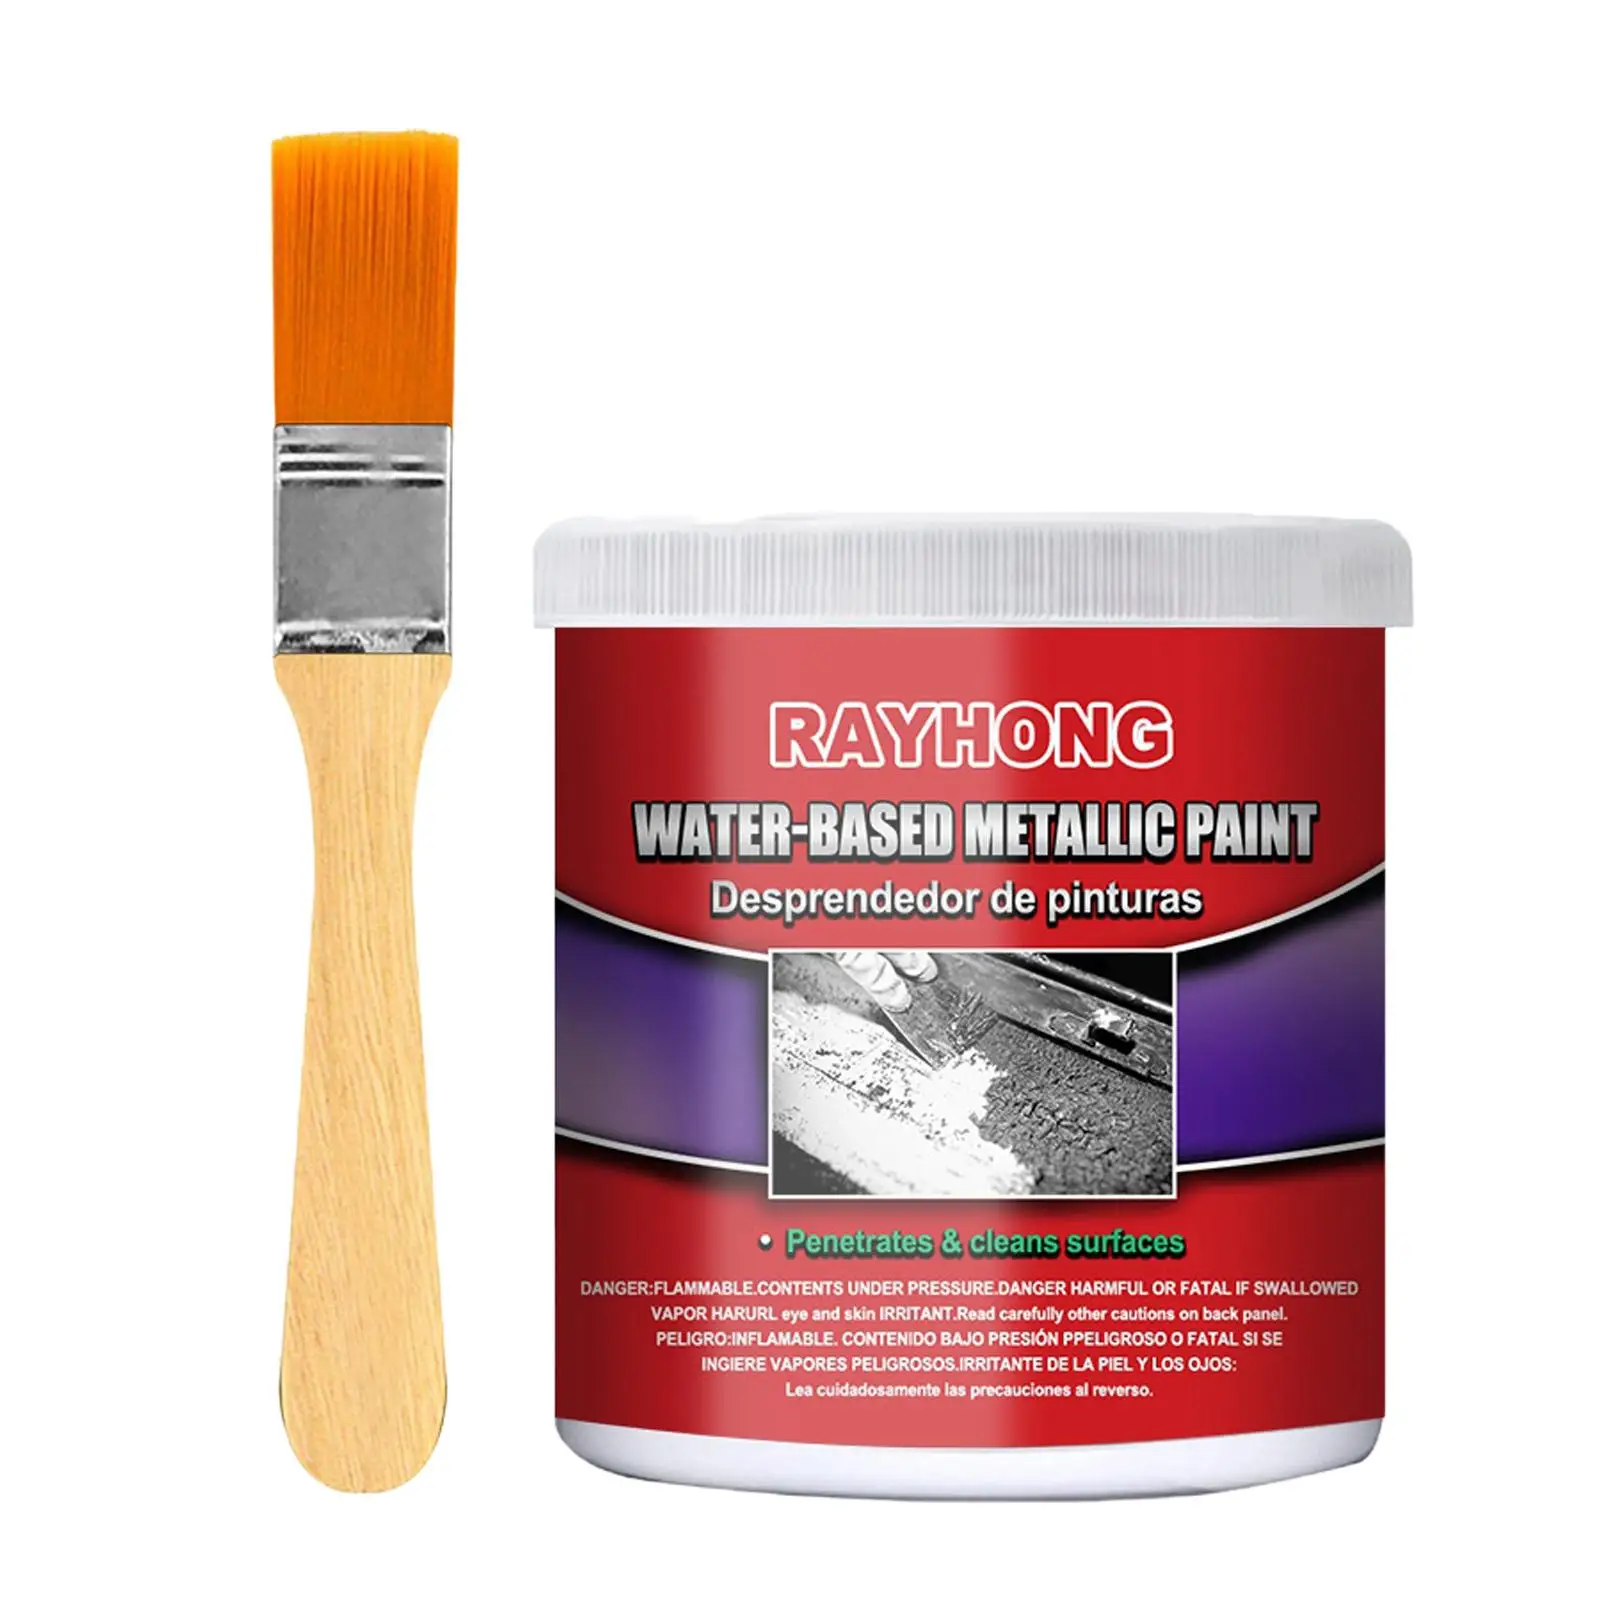 Rust Paint with Brush Car metal Paint for Machinery Automotive Railings